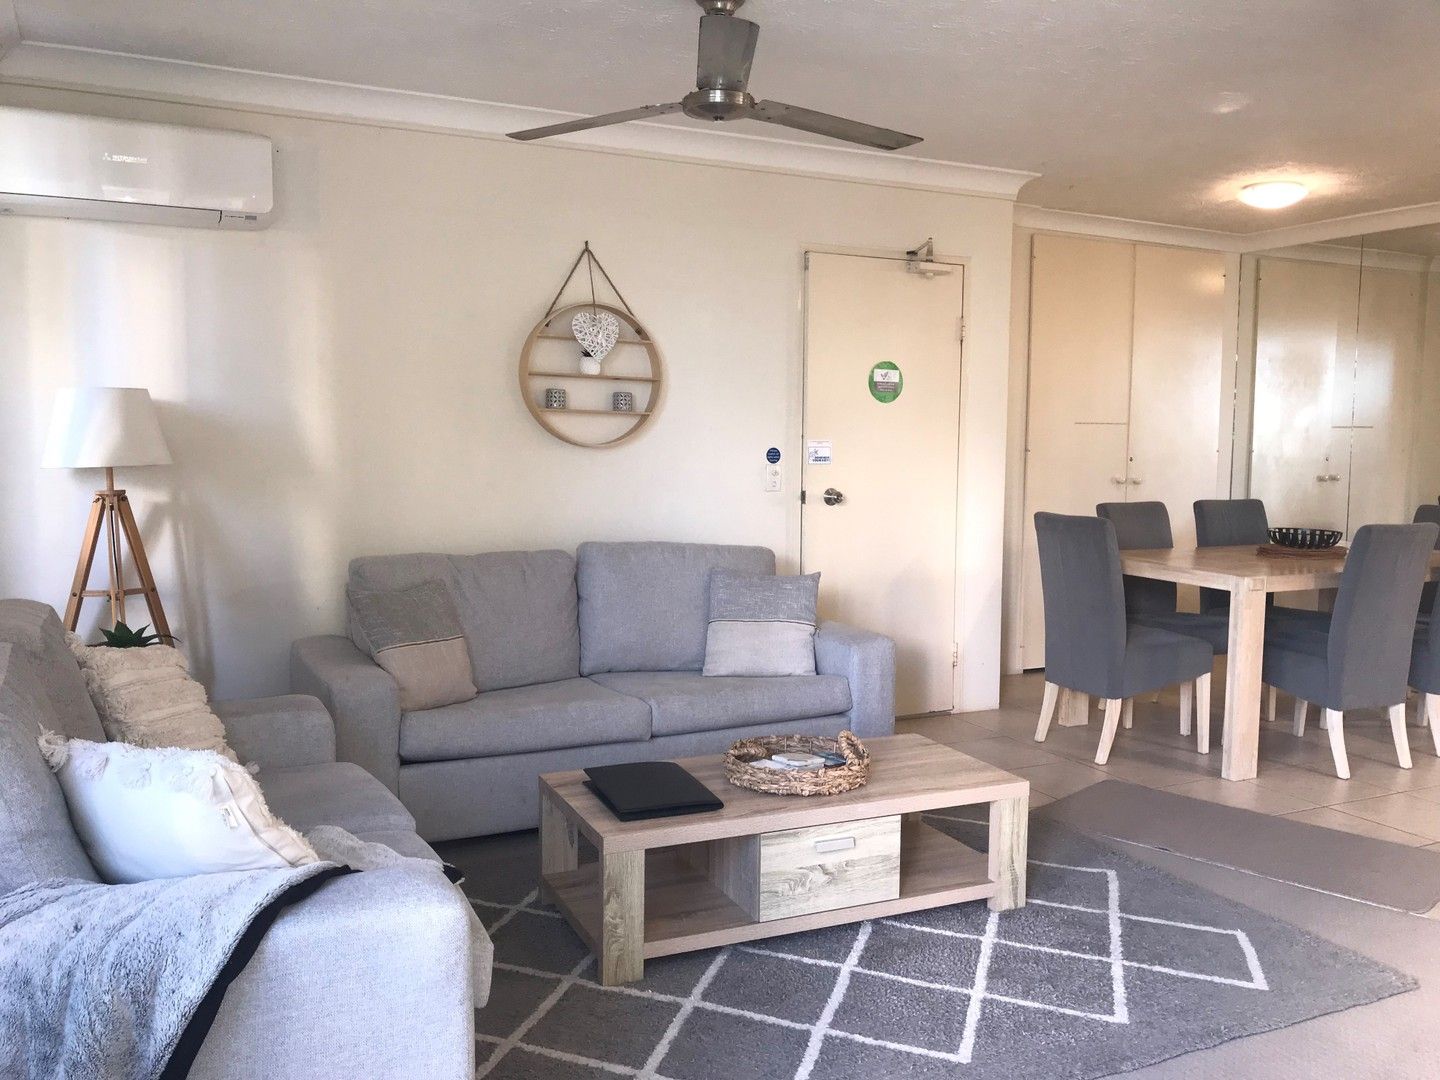 2 bedrooms Apartment / Unit / Flat in 15/117 Old Burleigh Road BROADBEACH QLD, 4218